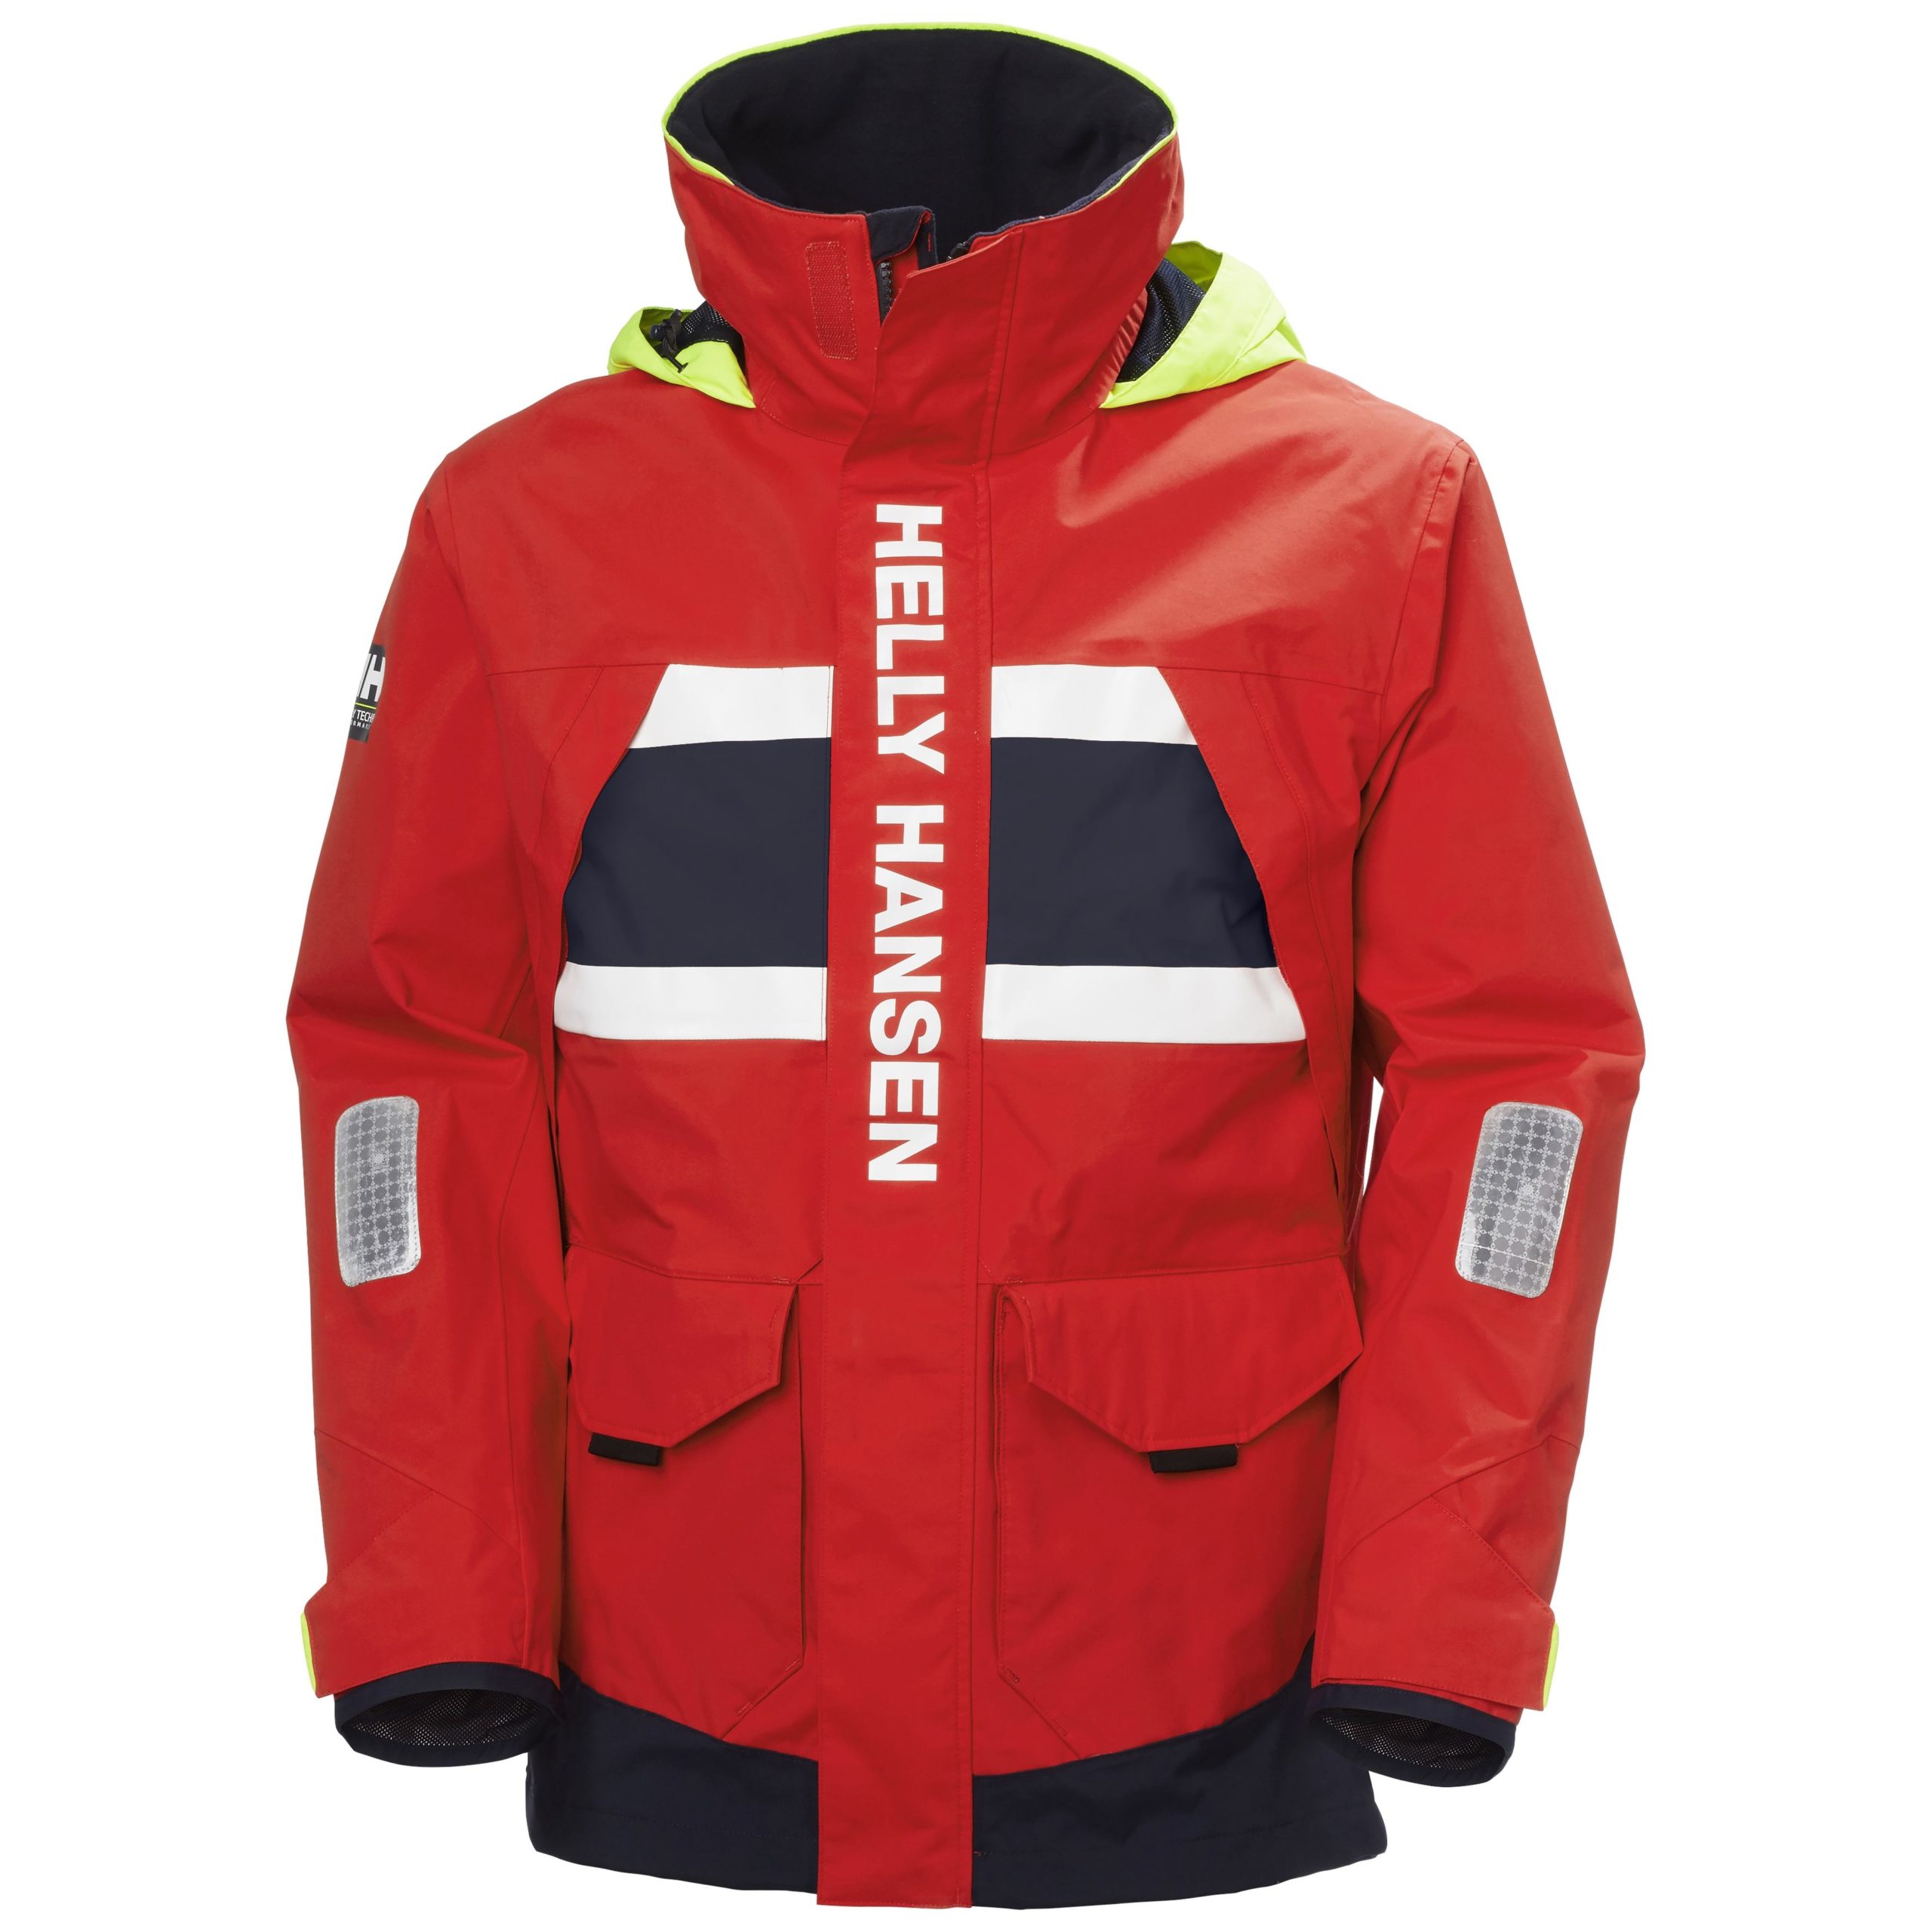  Helly Hansen Men's Salt Power Waterproof Sailing Jacket, 162  Red, Small : Clothing, Shoes & Jewelry